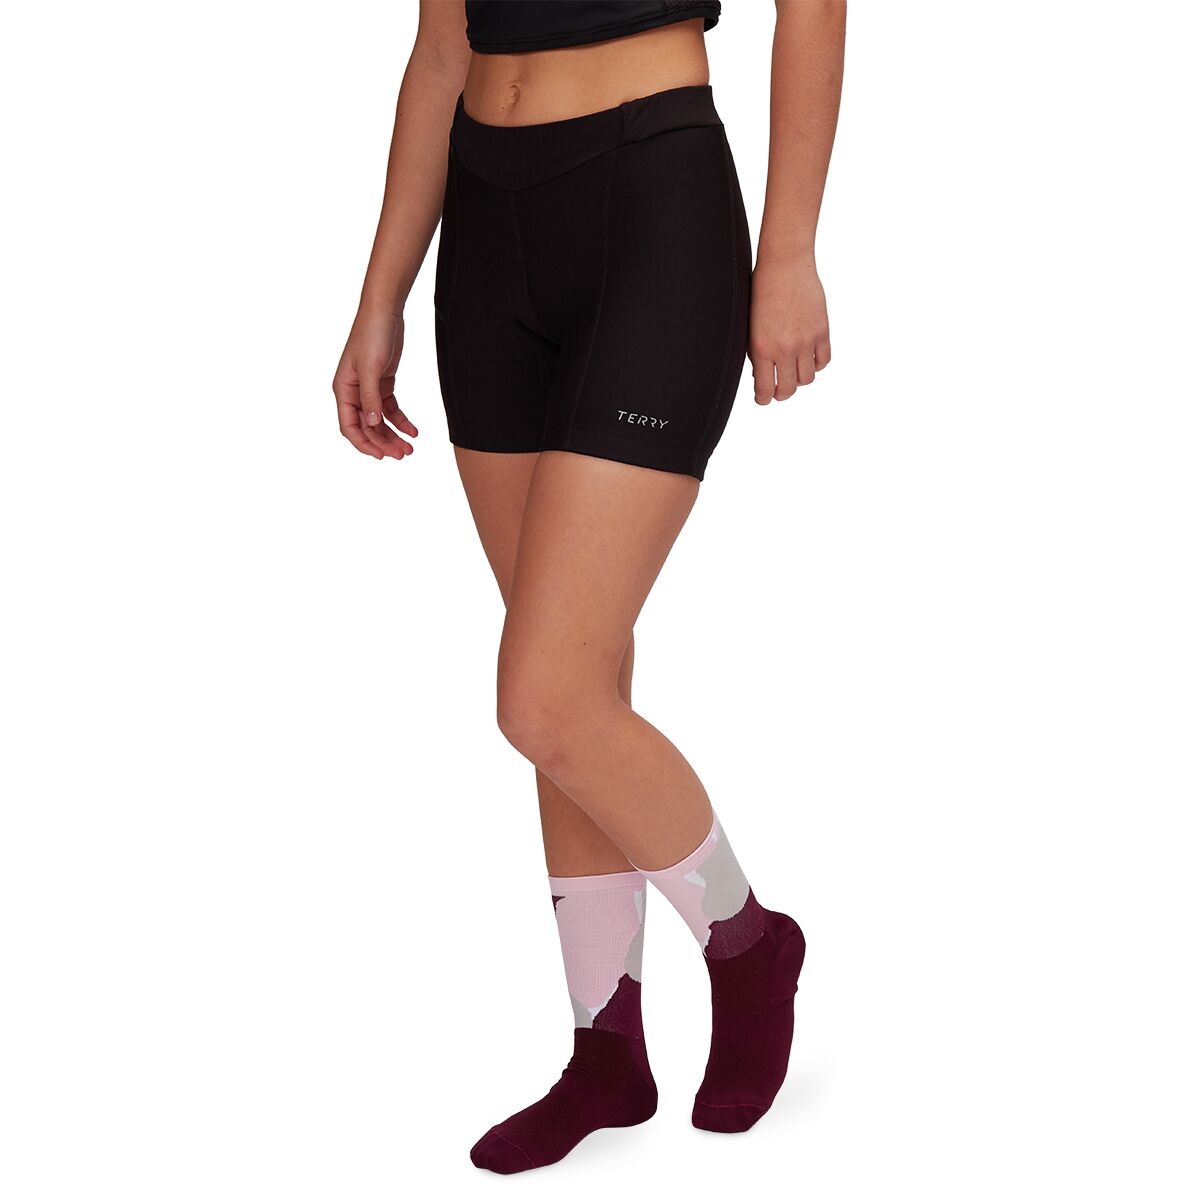 Terry Bicycles T-Short 5in - Women's product image